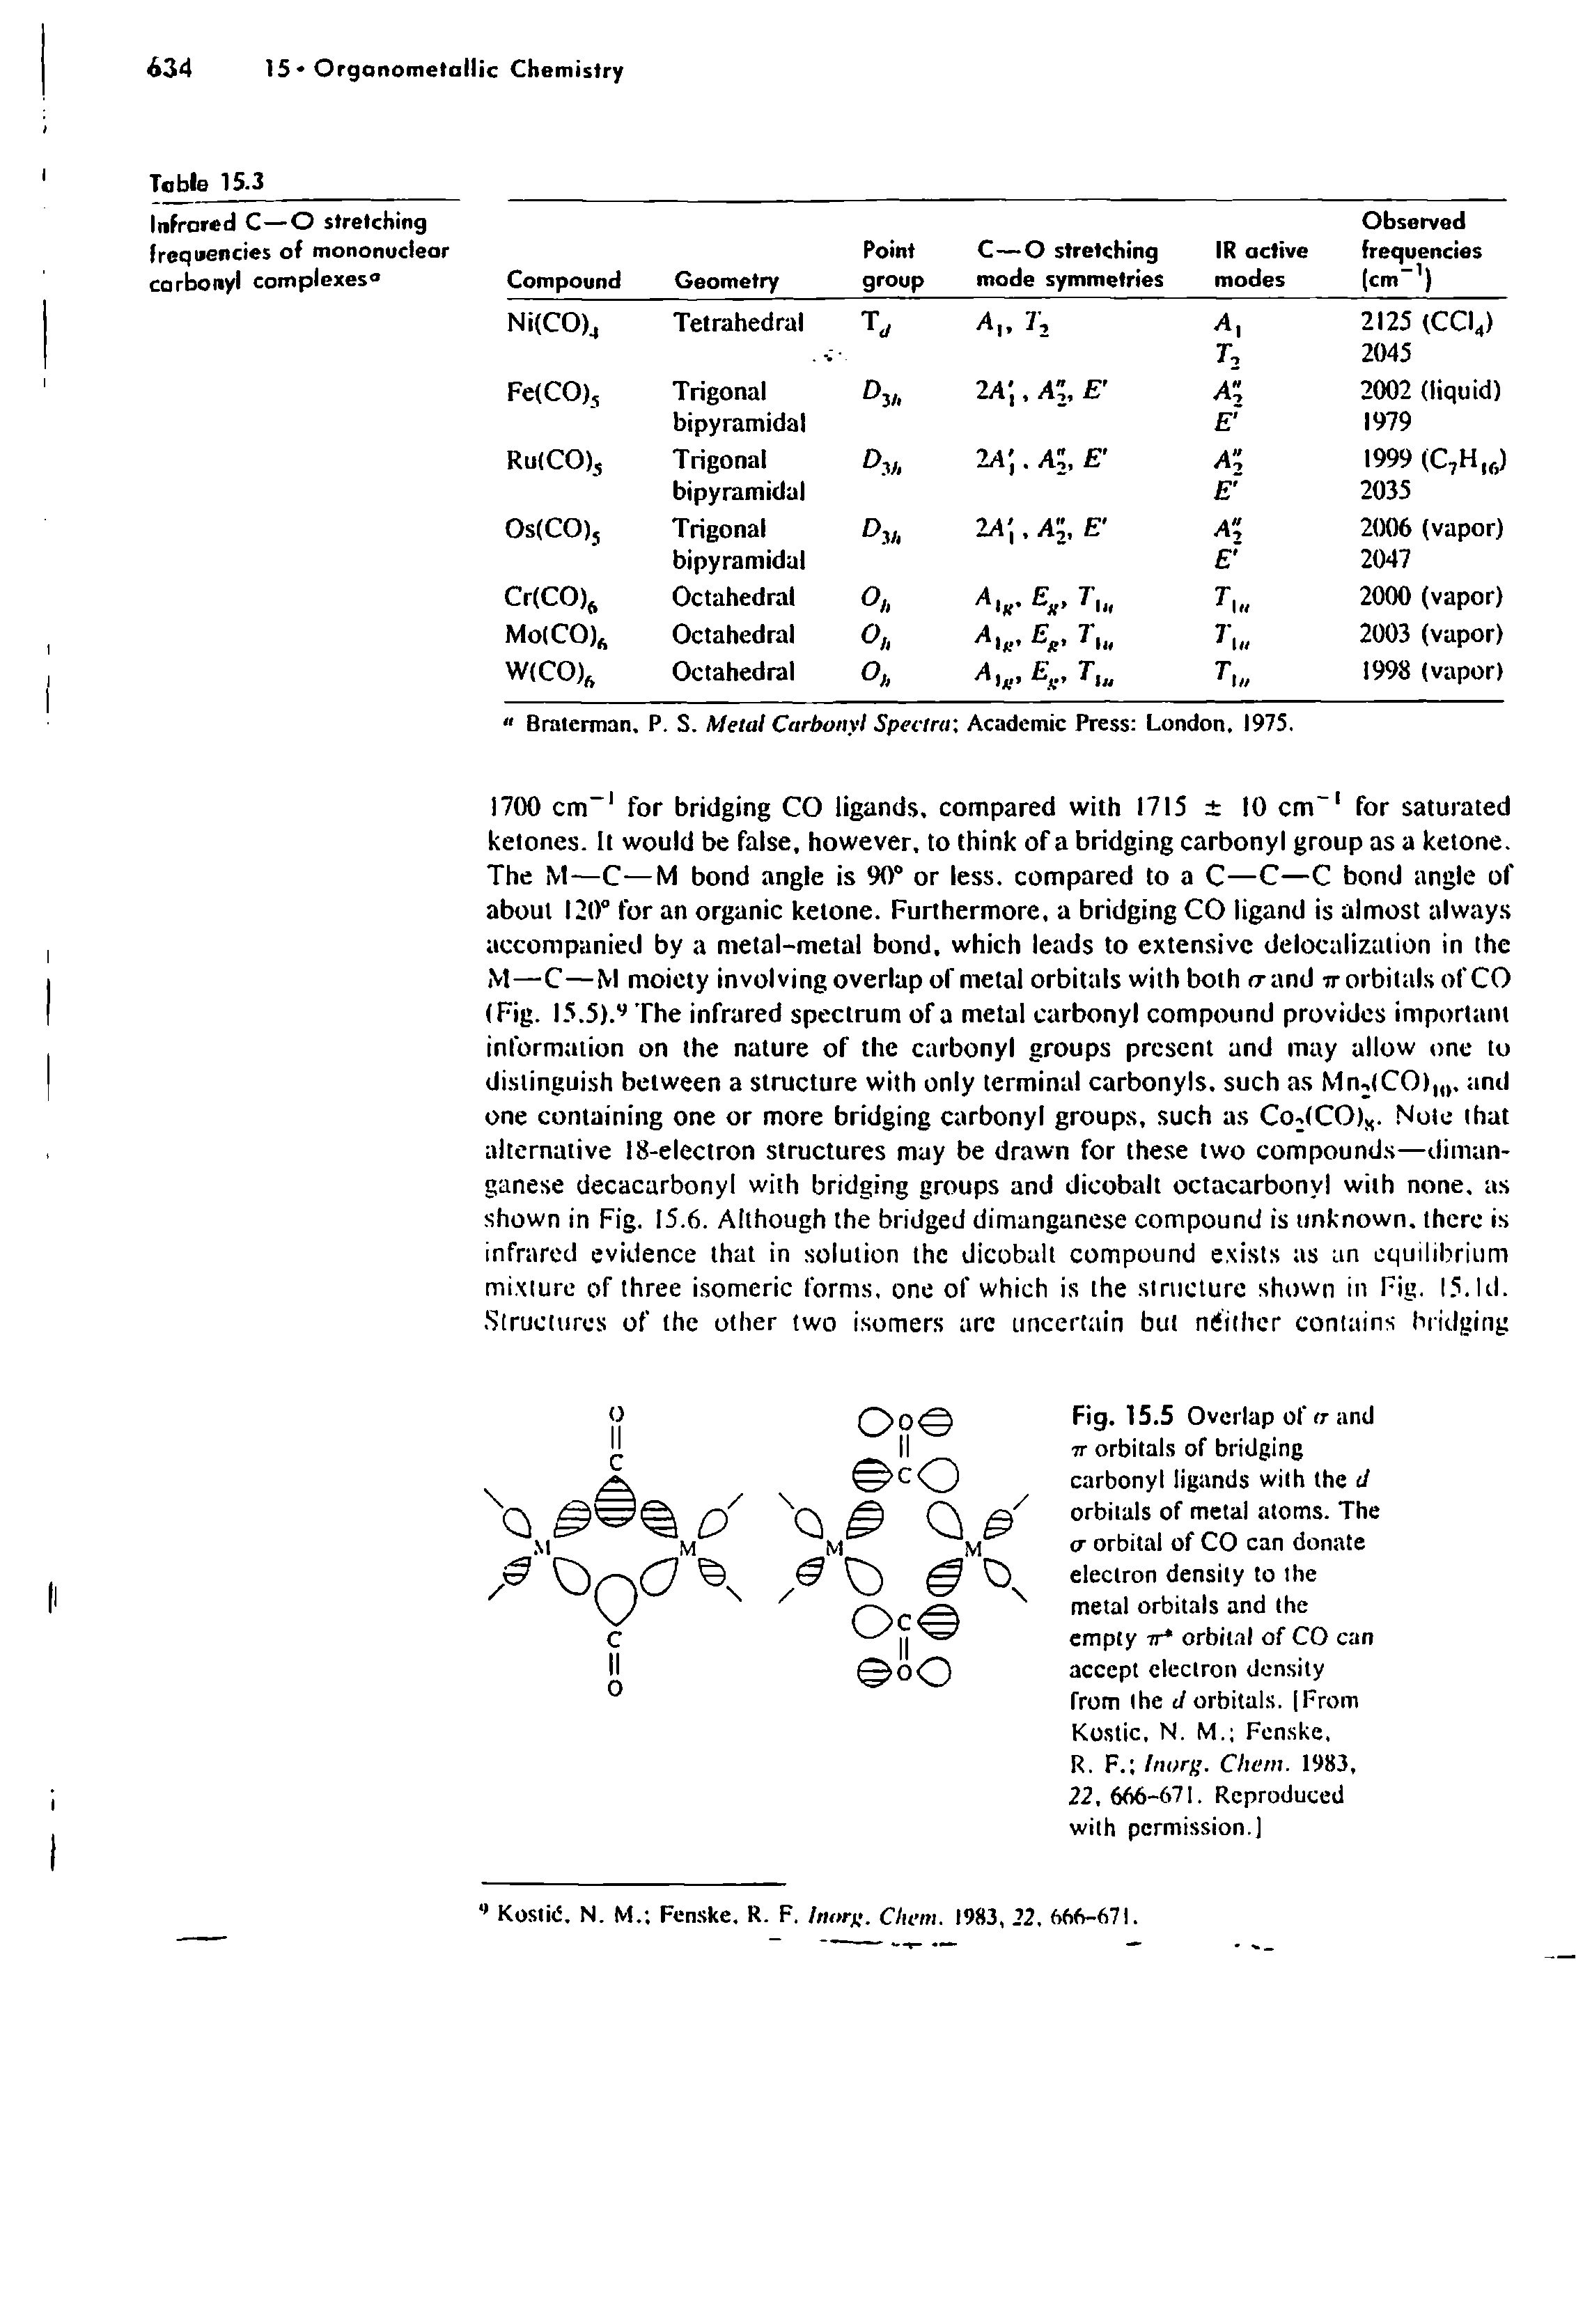 Fig. 15.5 Overlap of fr and TT orbitals of bridging carbonyl ligands with the d orbitals of metal atoms. The cr orbital of CO can donate electron density to the metal orbitals and the empty tt orbital of CO can accept electron density from the d orbitals. (From Kostic. N. M. Fenske.